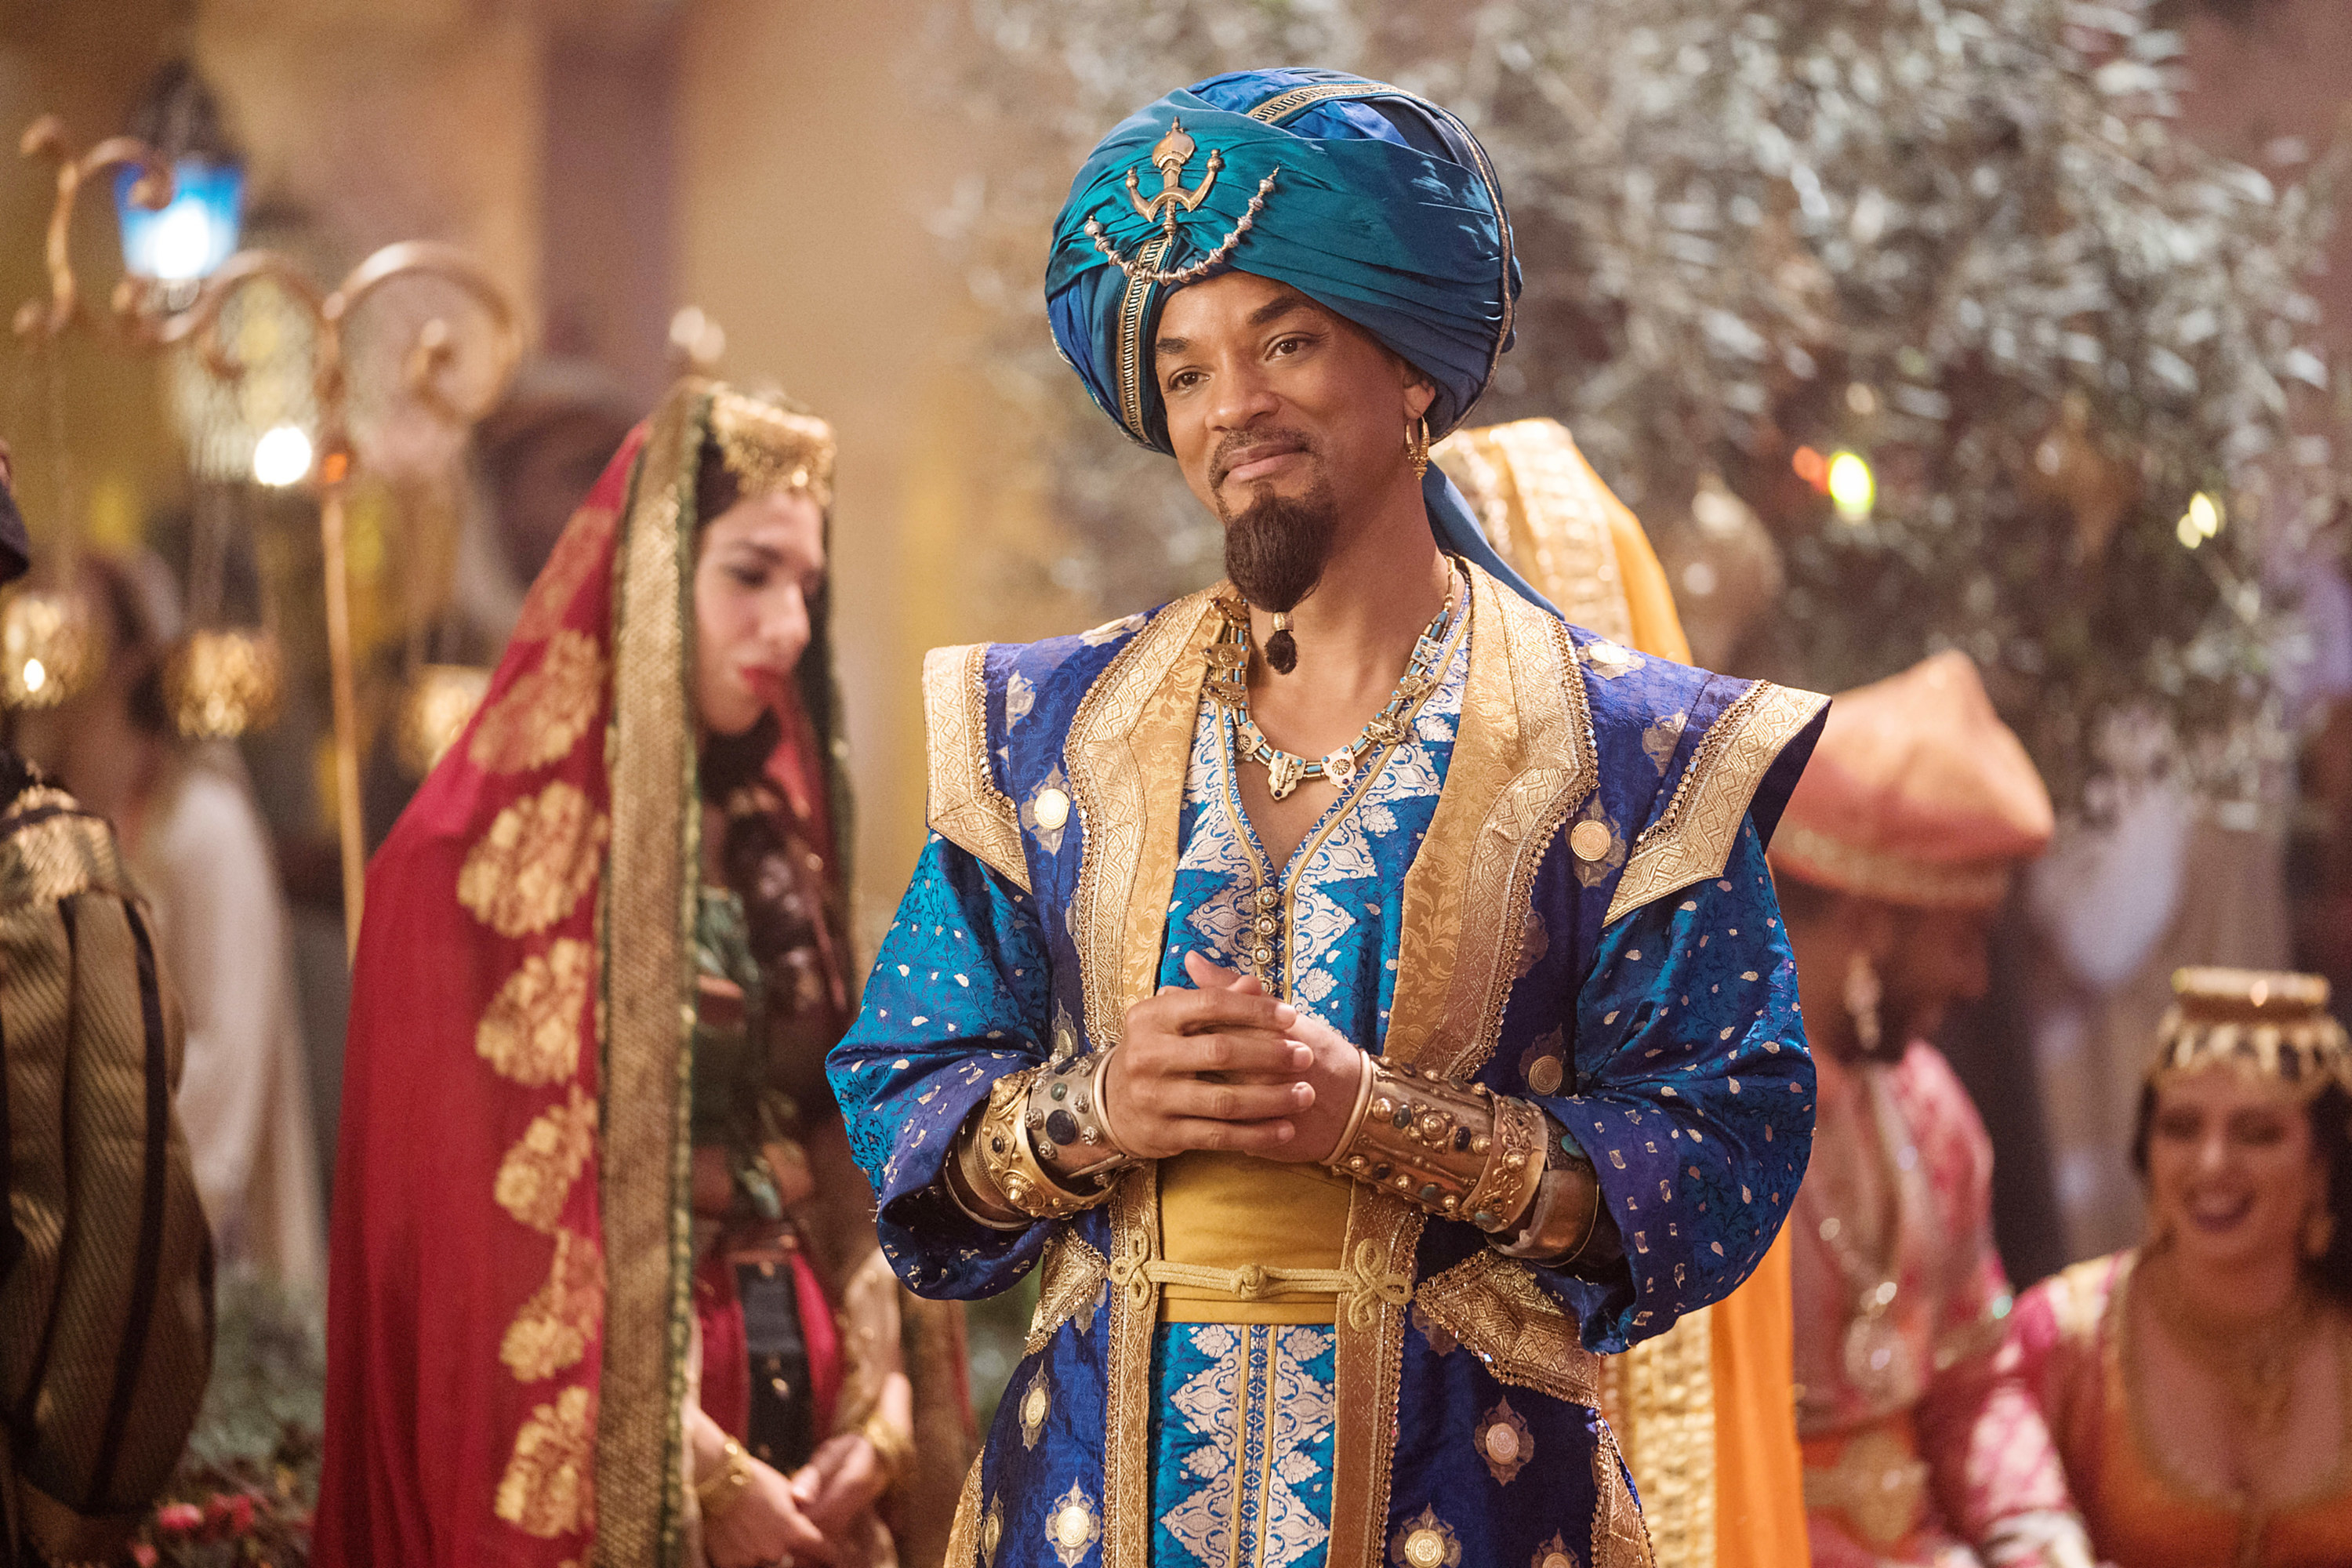 Will Smith as Genie smiling at someone off screen